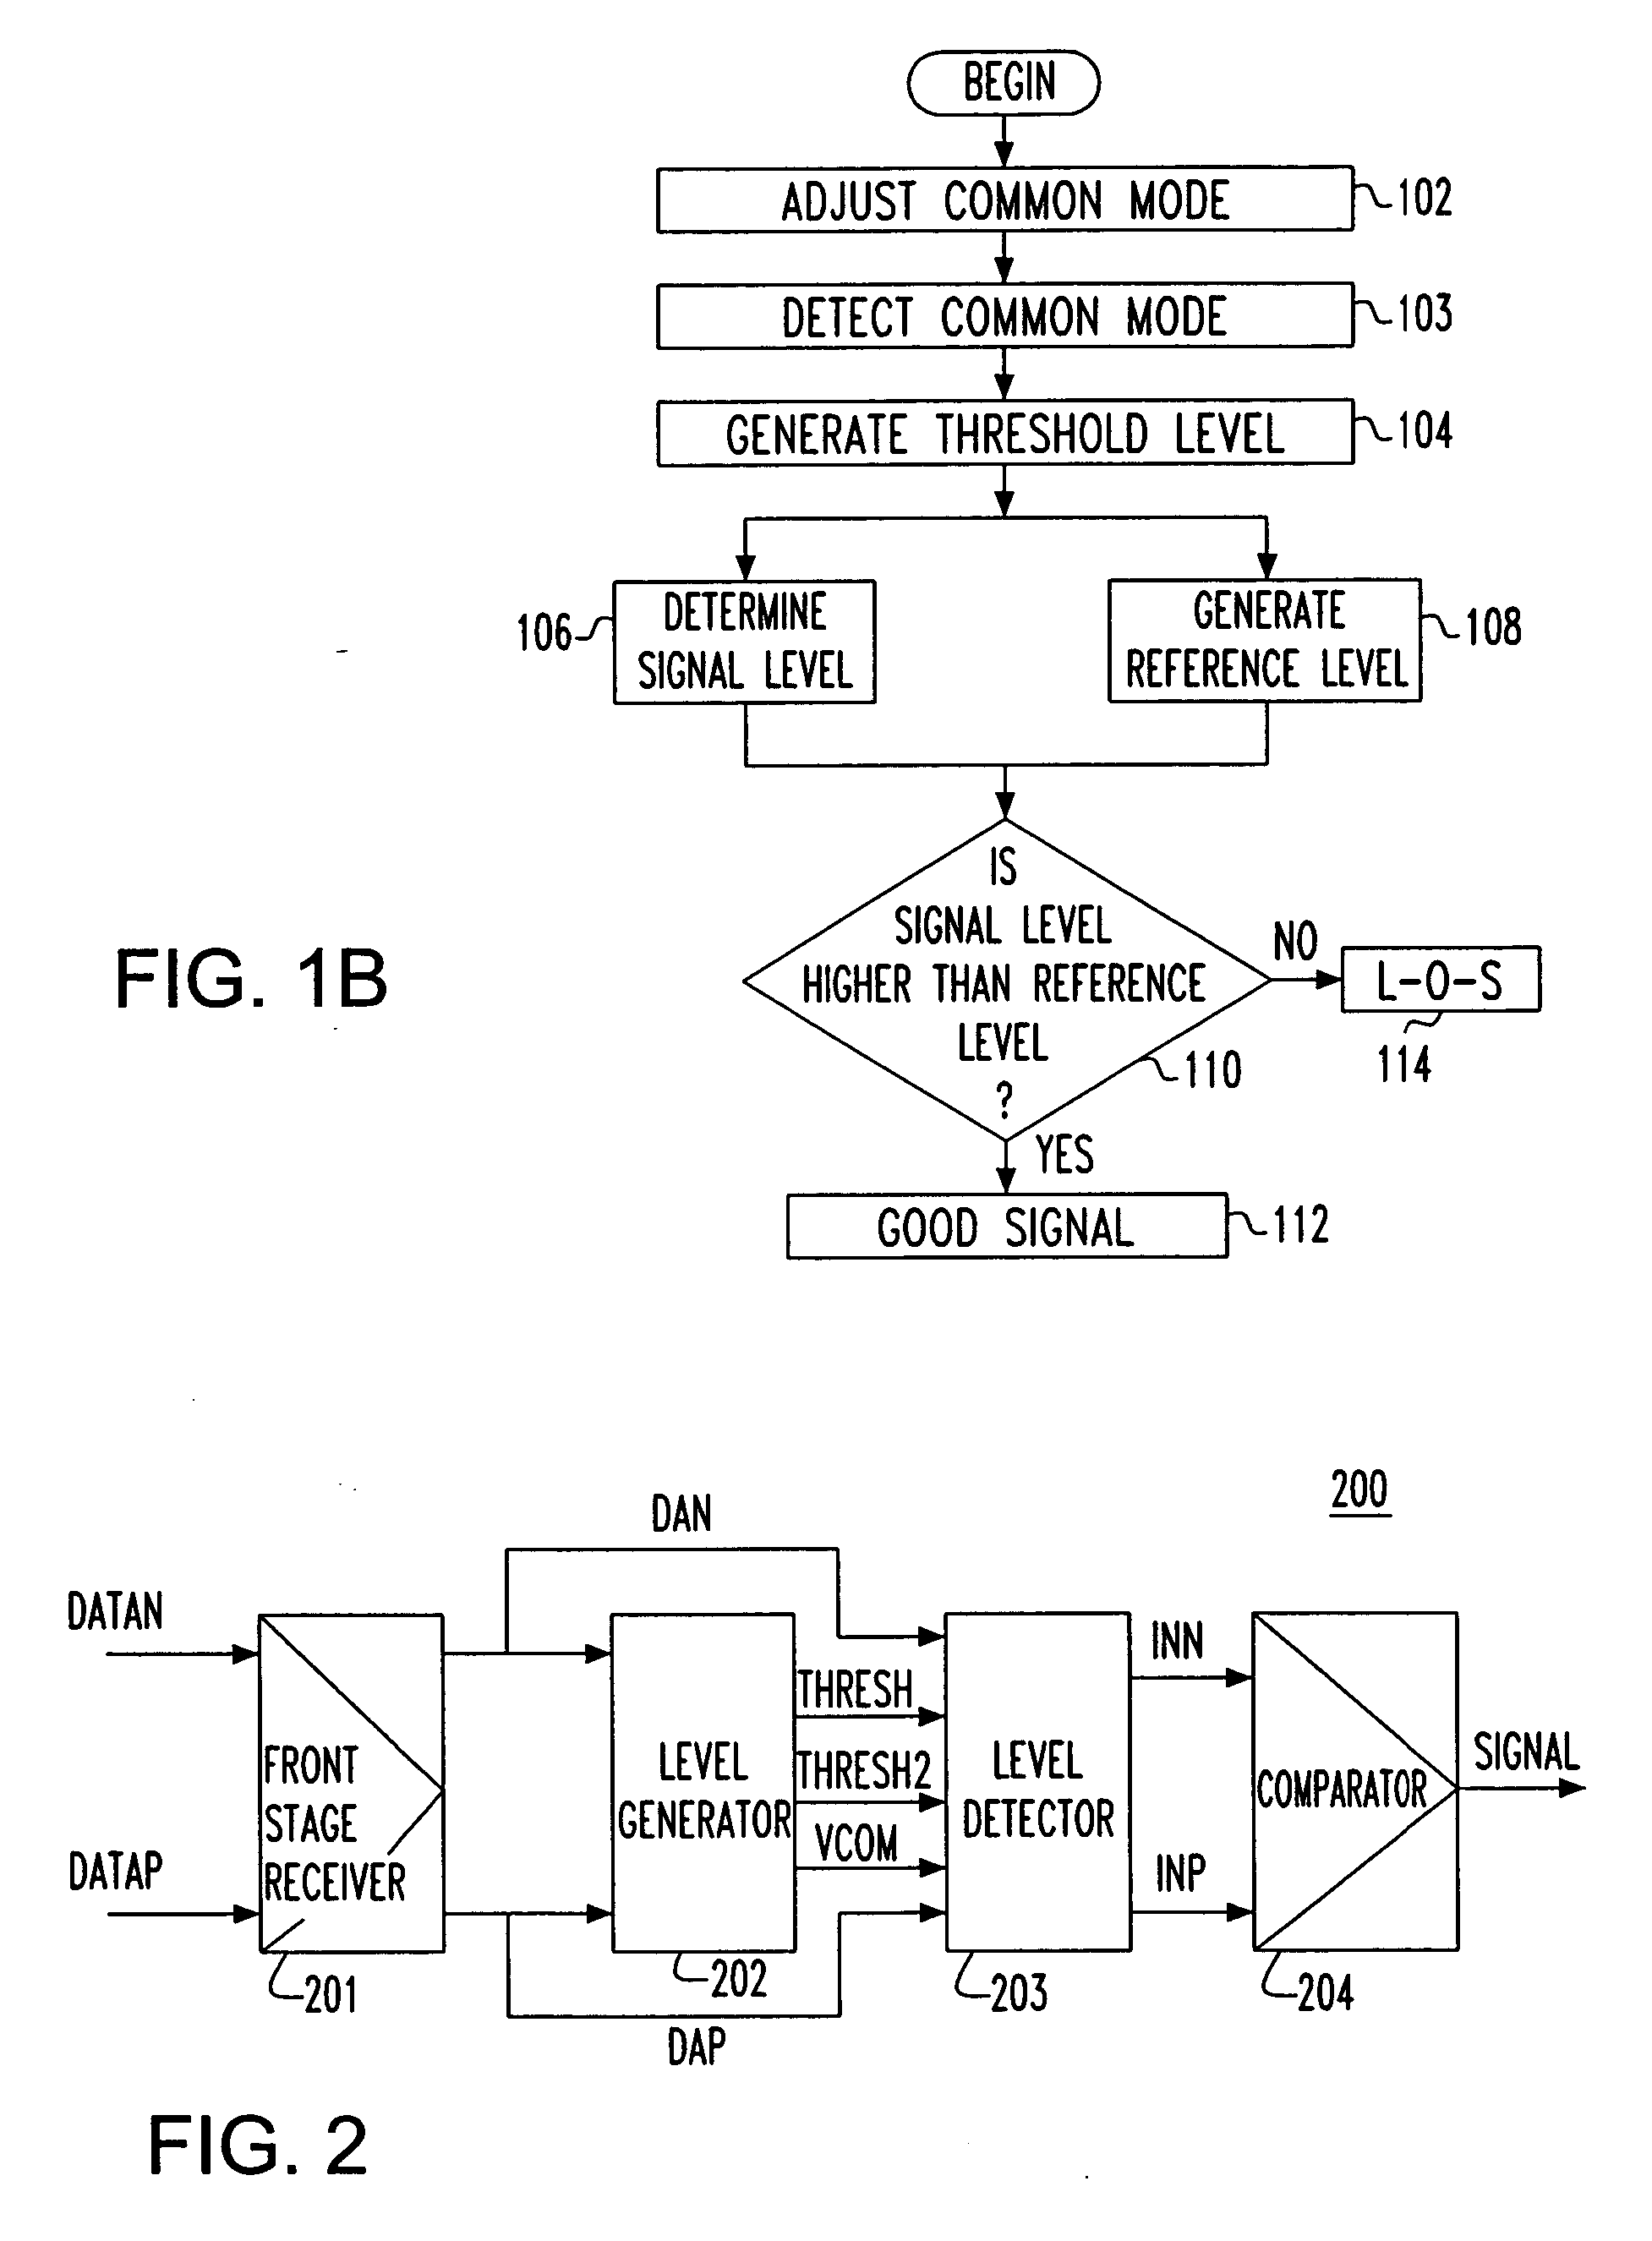 Apparatus and method for detecting loss of high-speed signal